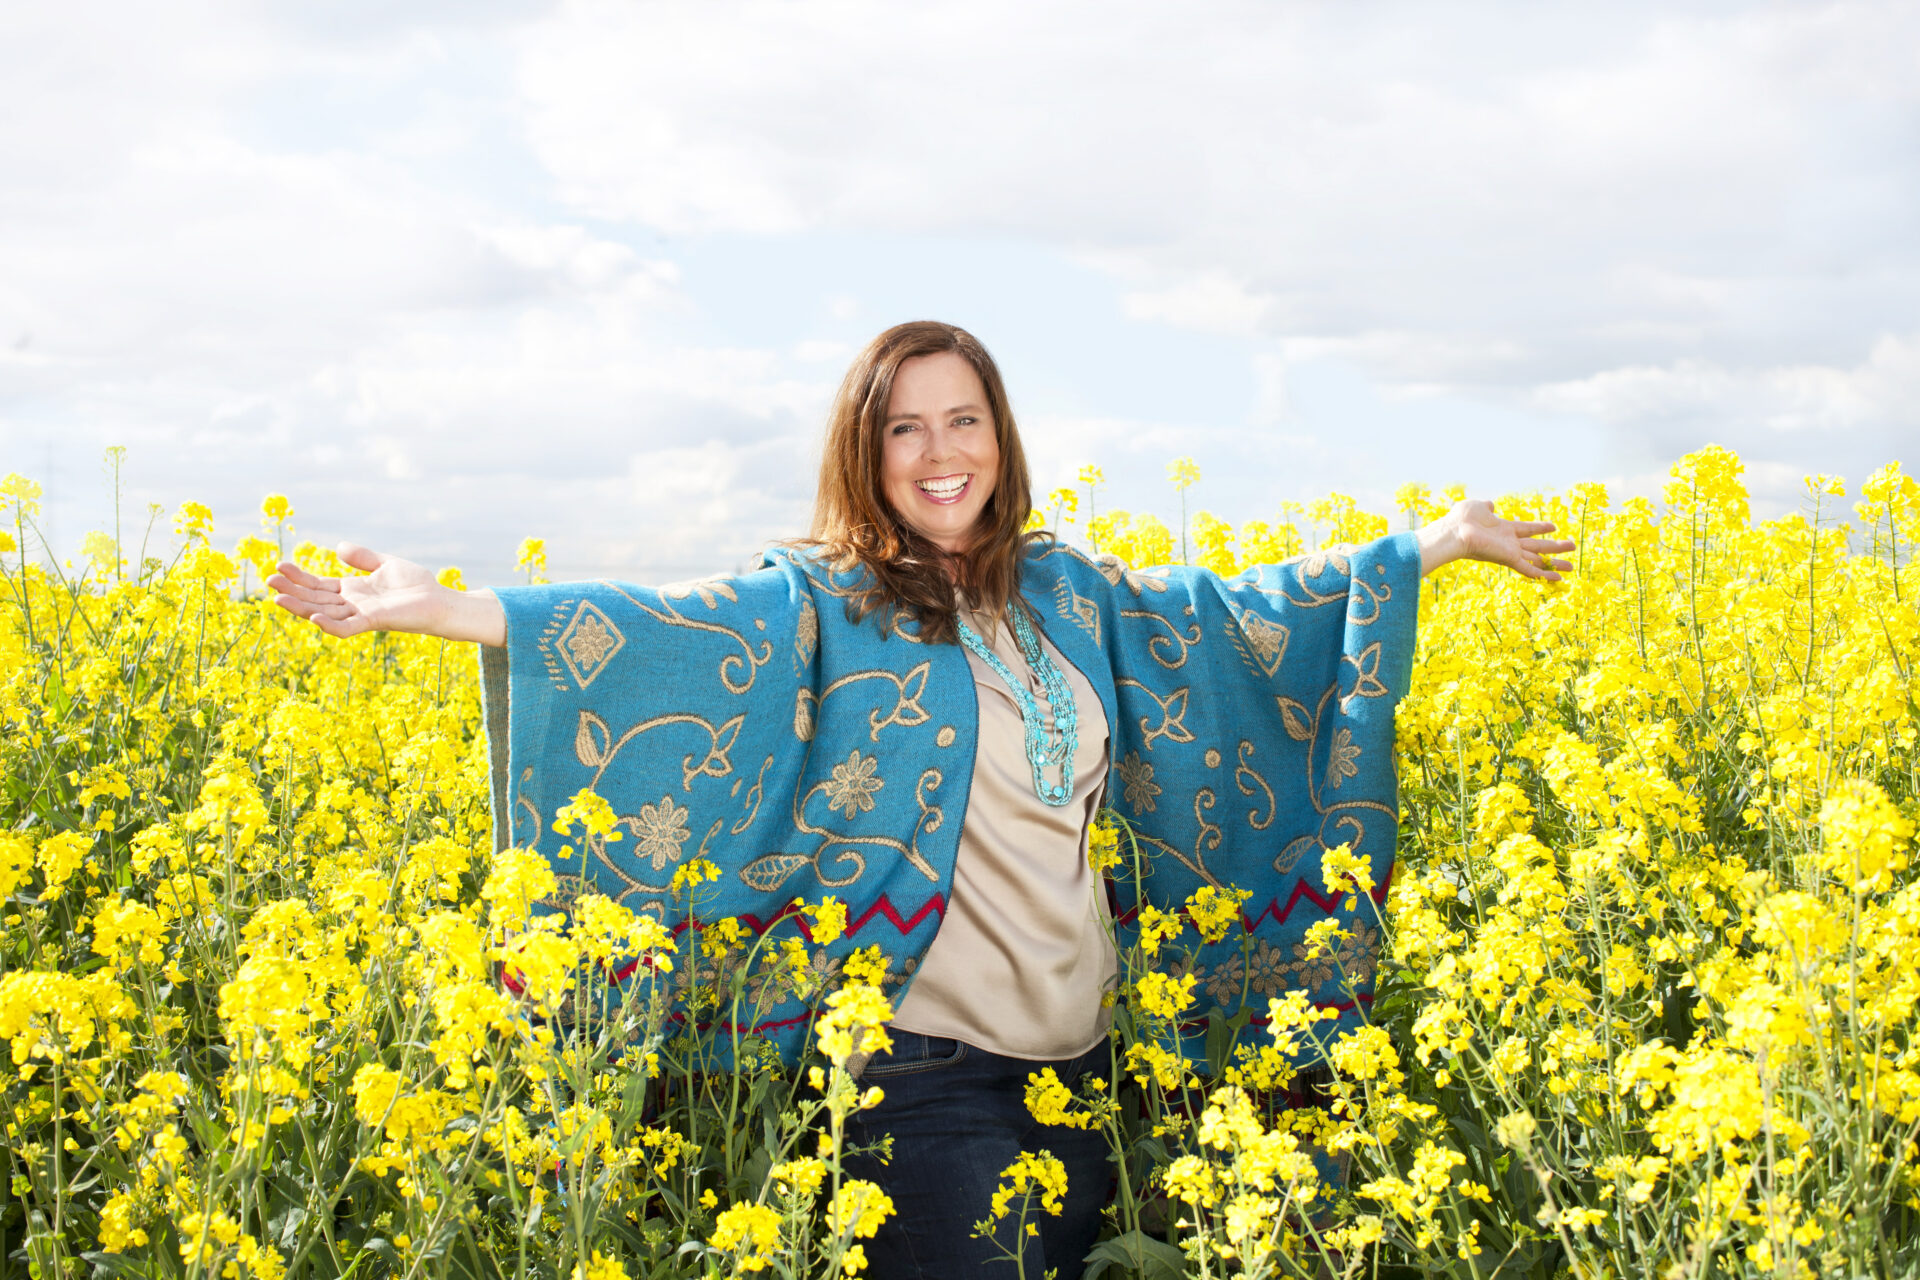 Lady in turquoise standing in field of yellow flowers.